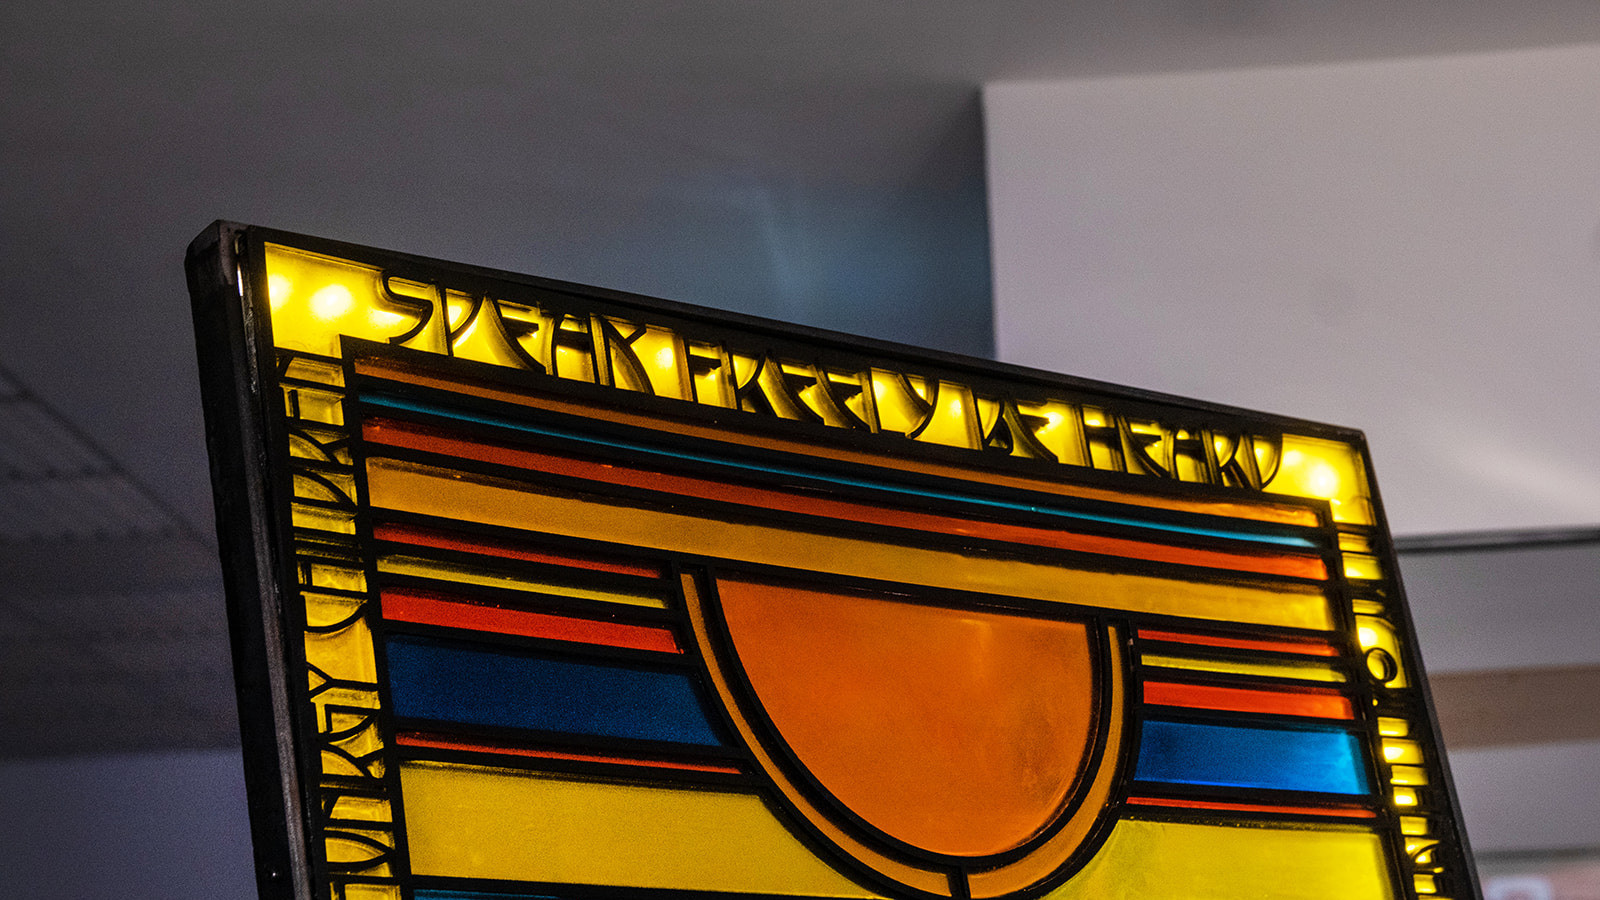 The top section of a colourful stained glass panel stands in a shadowy room. Sunlight illuminates a section of the panel which reads 'Speak Freely Be Heard' in black text on a yellow background.